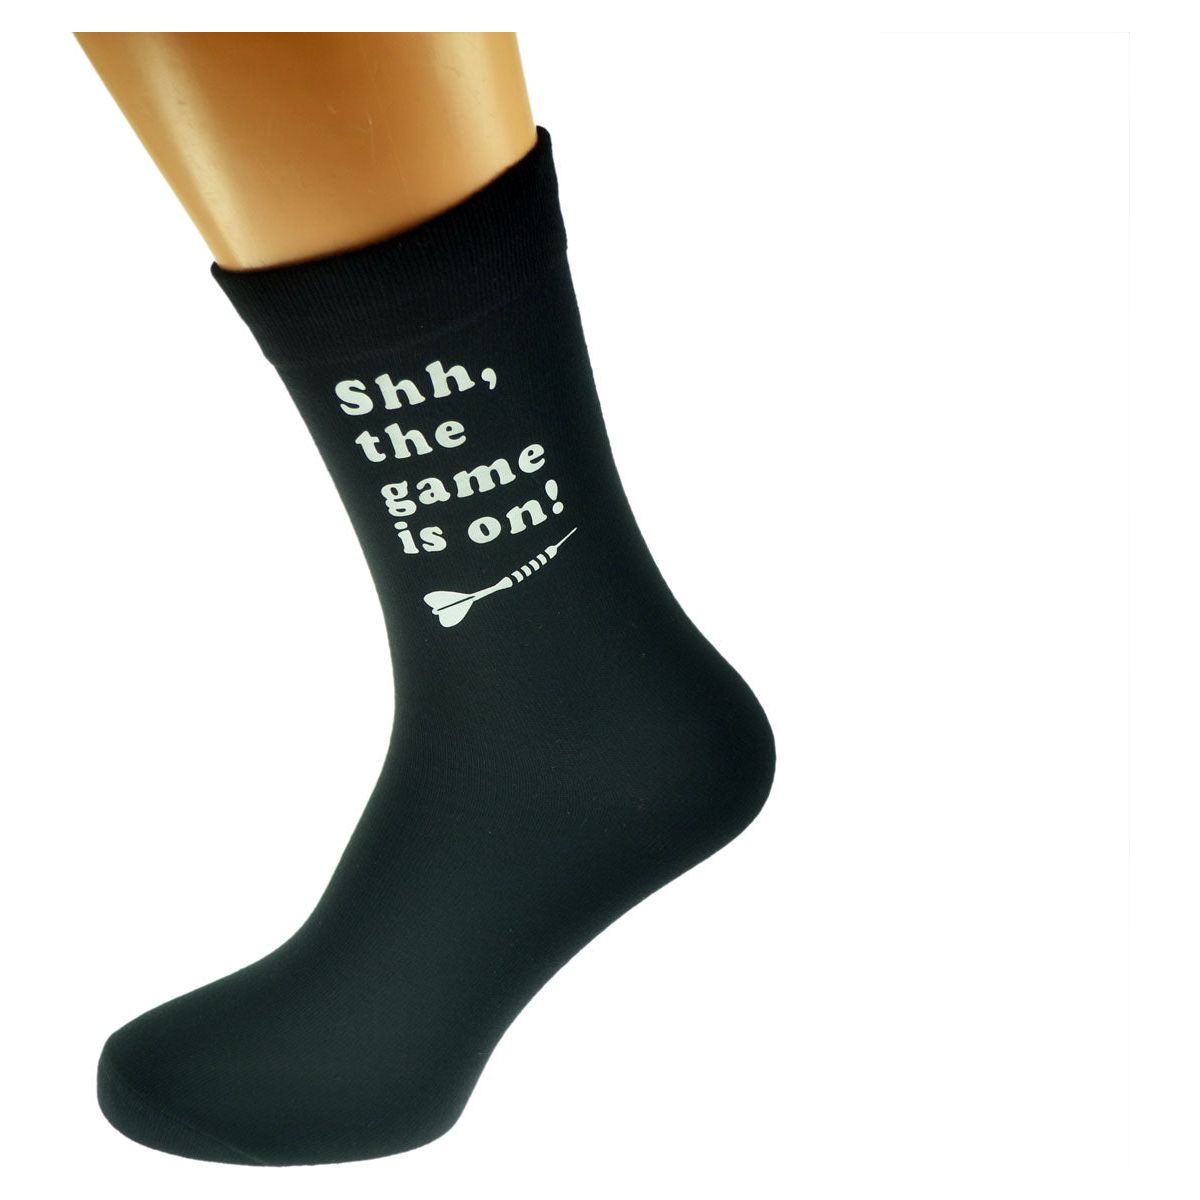 Shh the game is on Darts Fan Mens Black Socks - Ashton and Finch